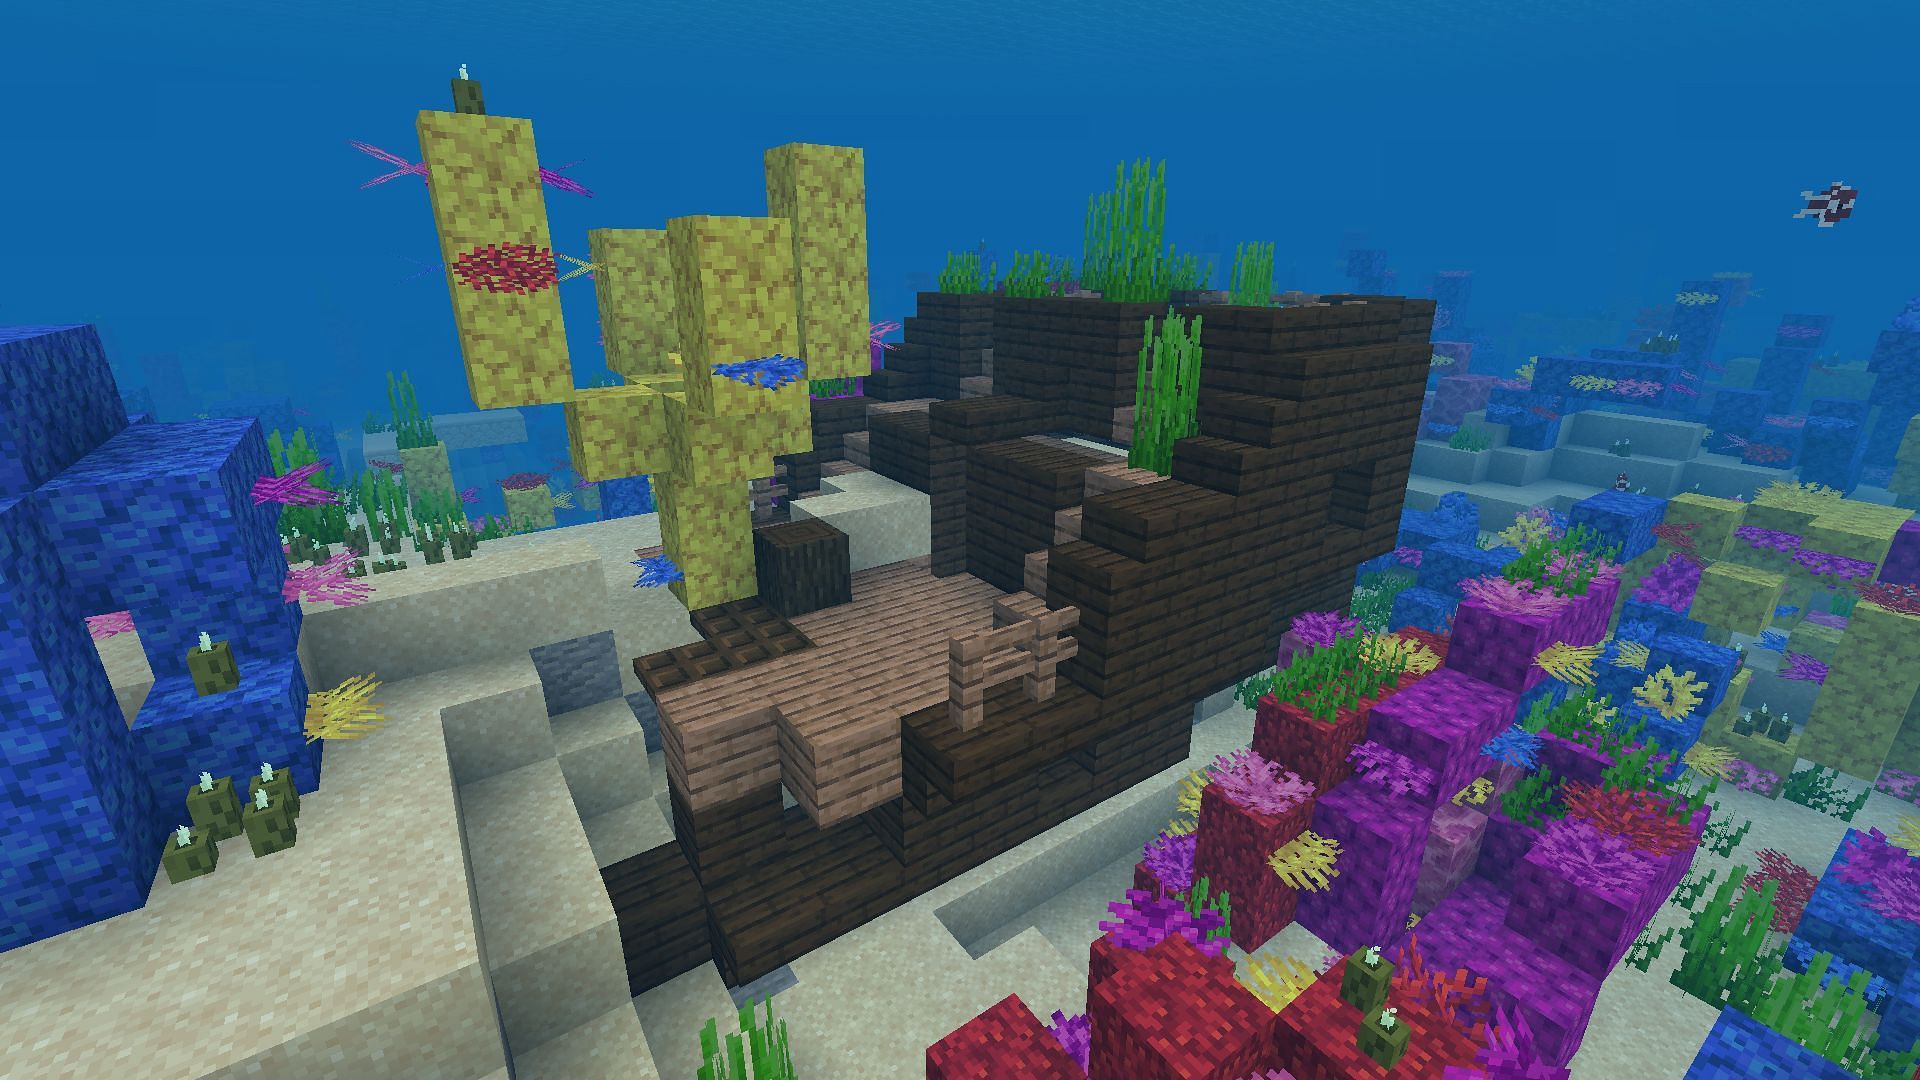 First nearest shipwreck in the coral reef in Minecraft 1.19 (Image via Mojang)